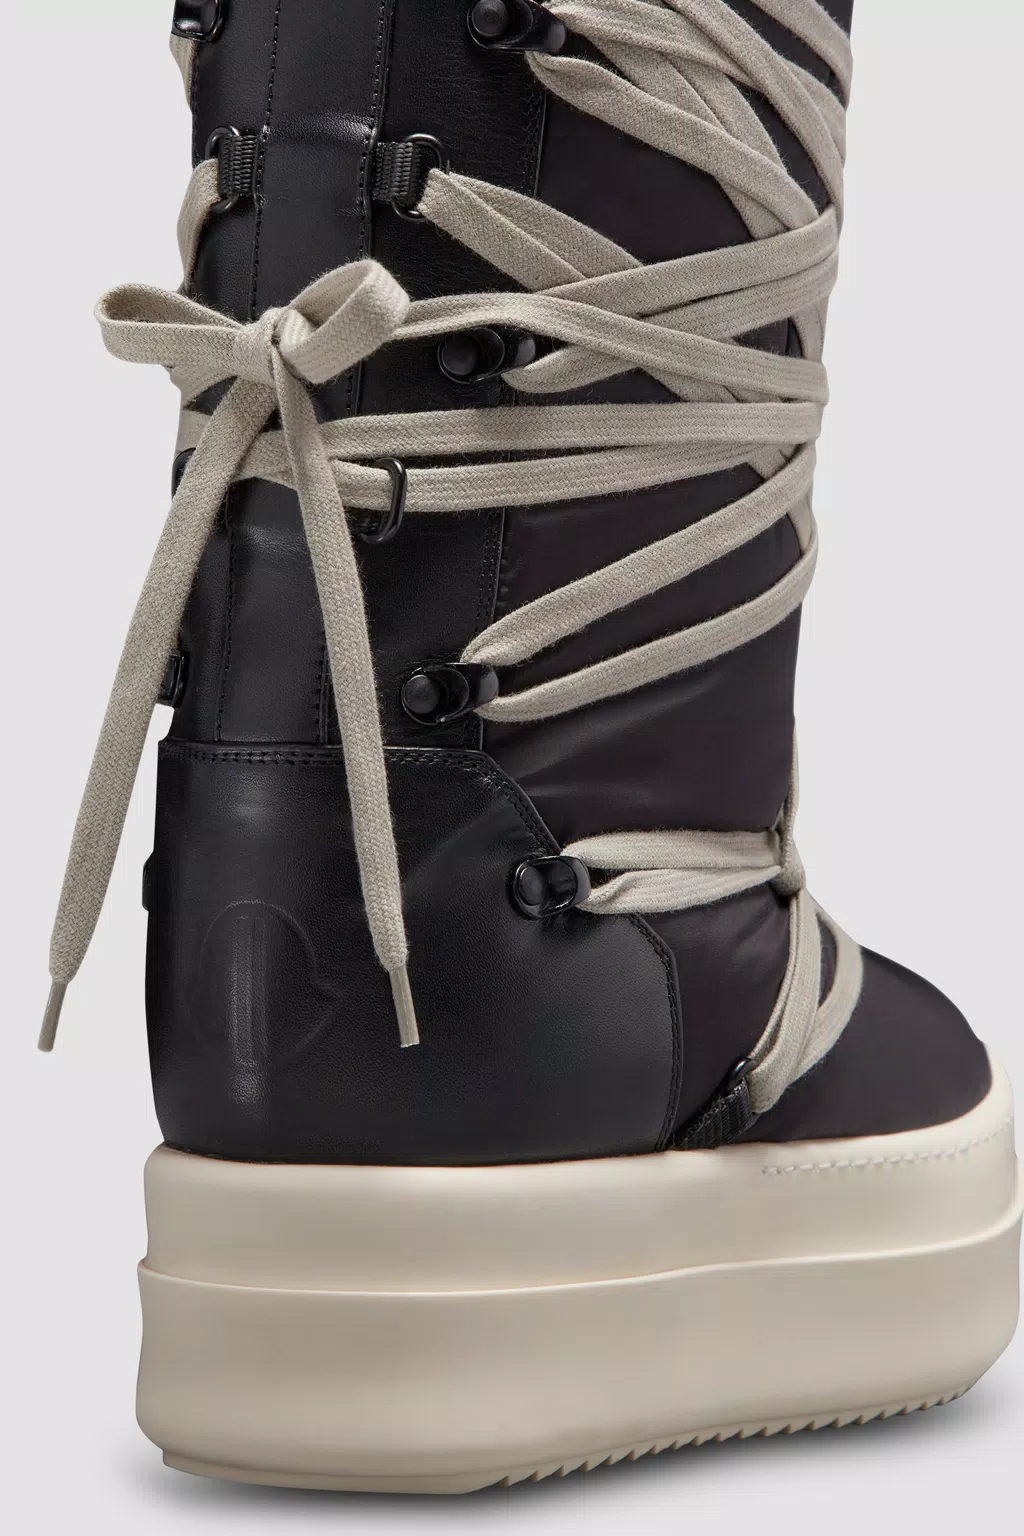 Black Bigrocks Boots - for Special Projects | Moncler US